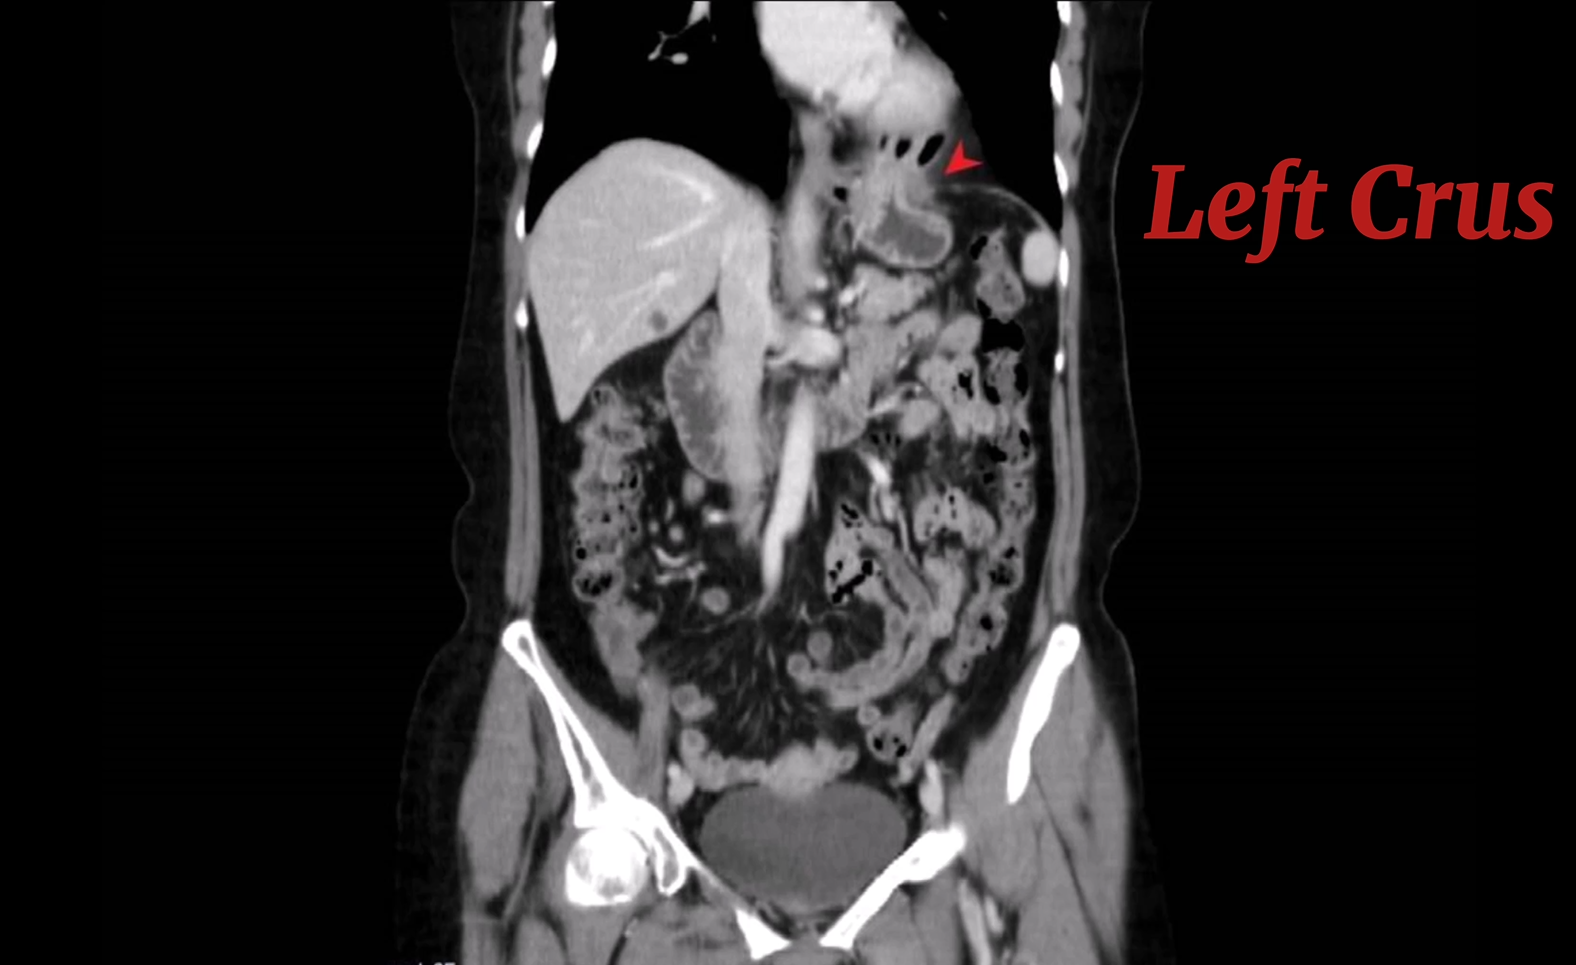 CT scan coronal view showing Left crus of diaphragm.